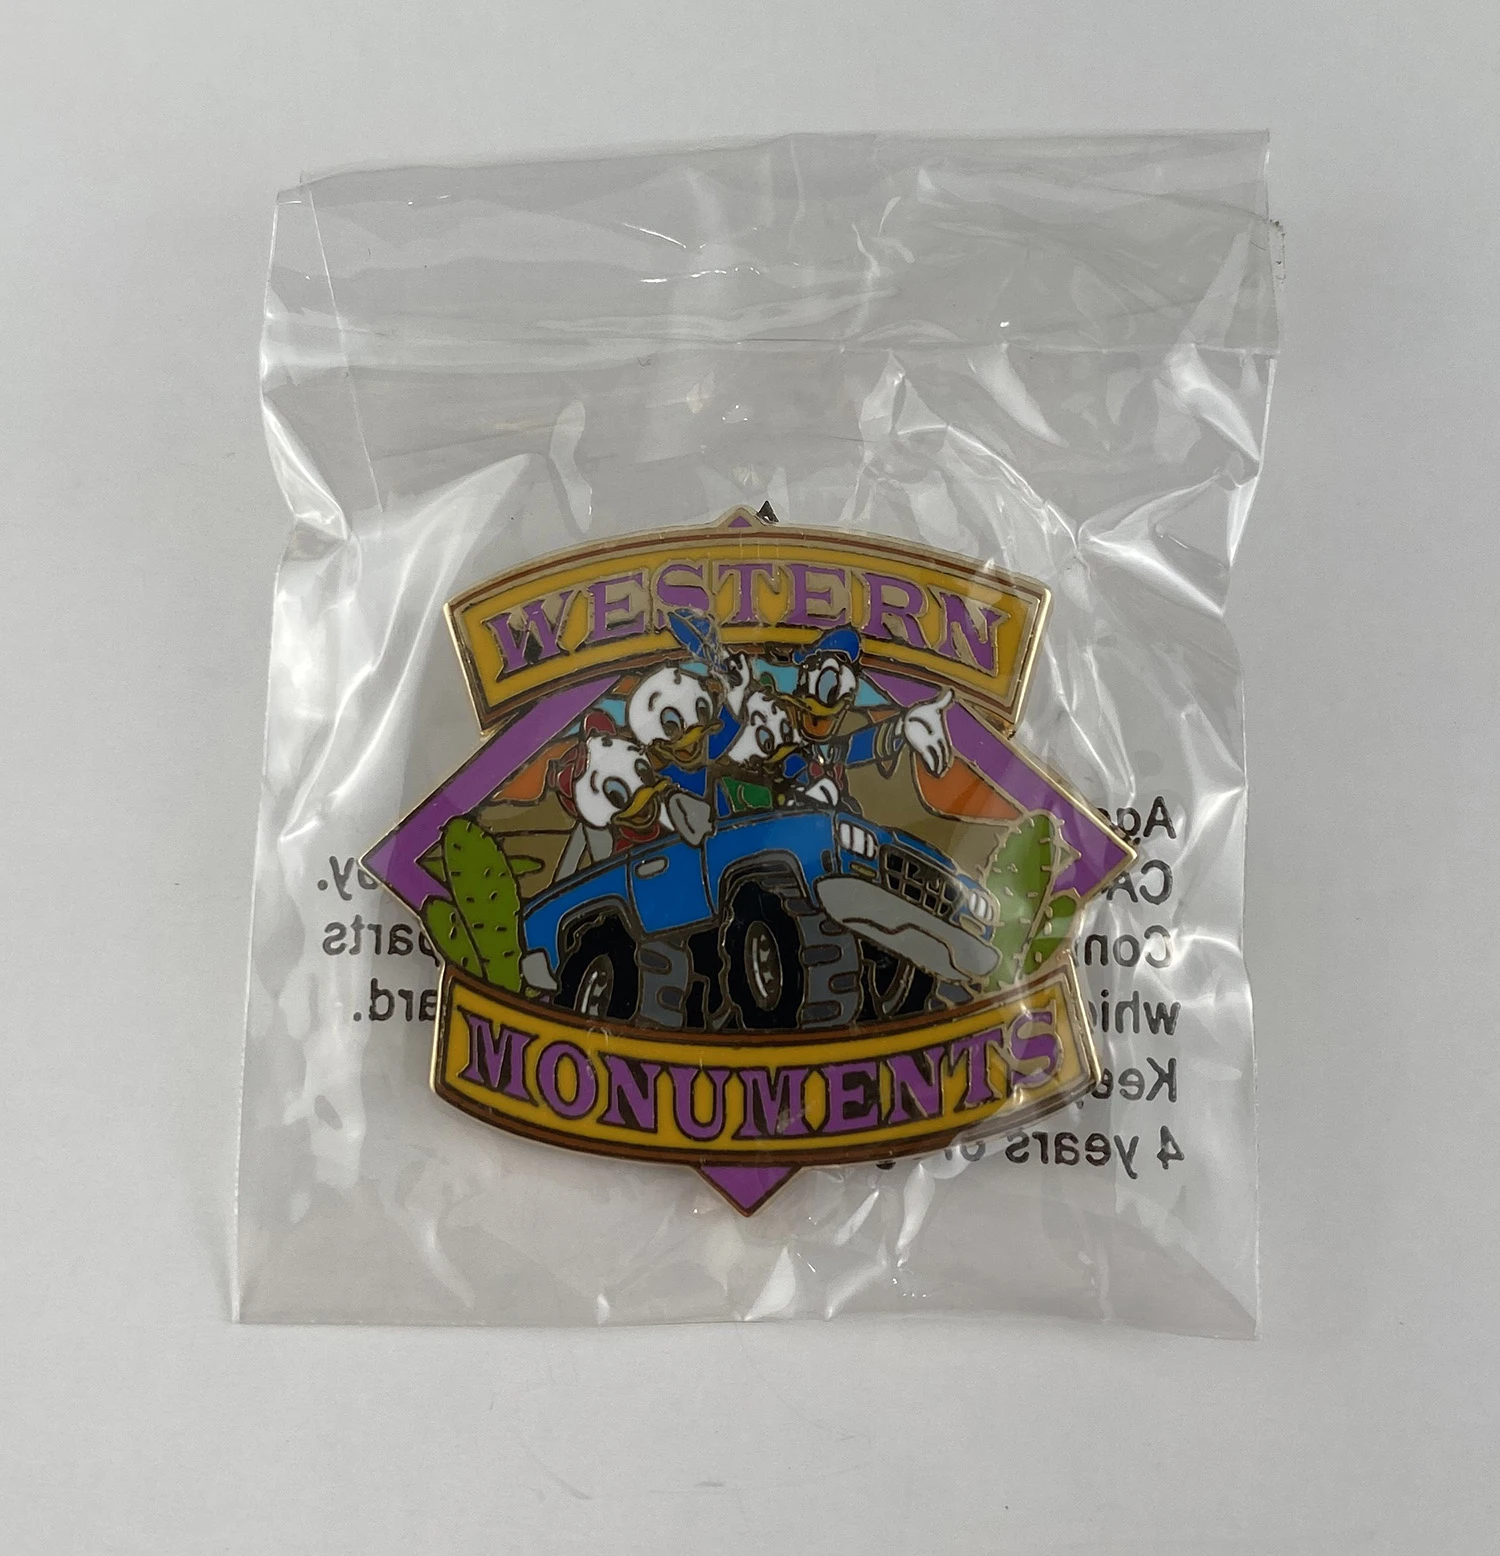 products Disney Pin - Adventures By Disney - Southwestern Splendor - Western Monuments - Donald Duck and Nephews